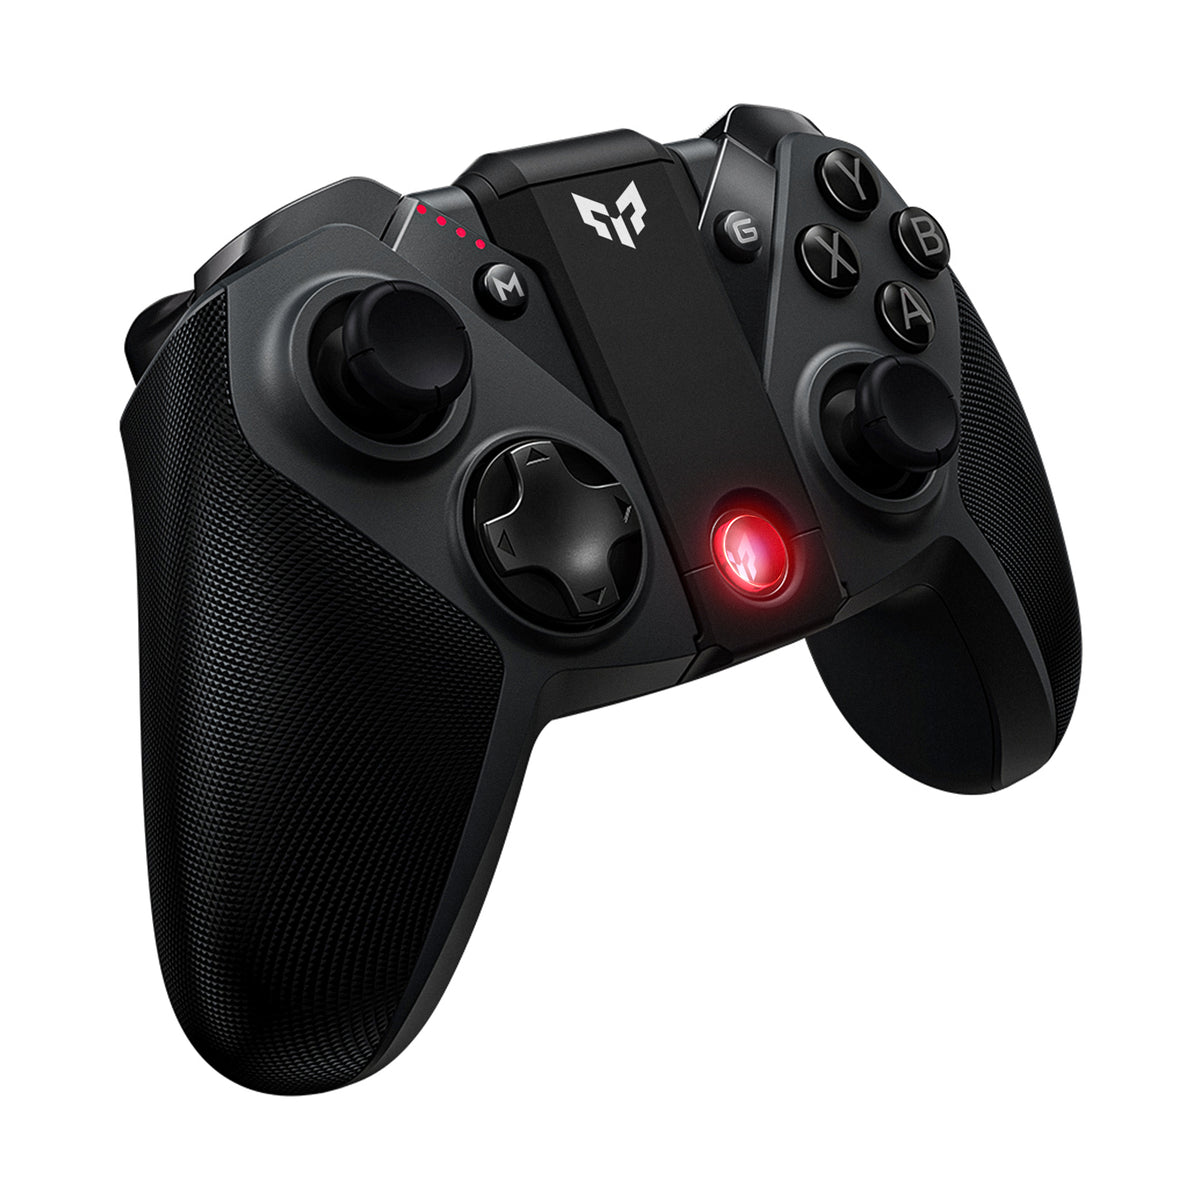 The Mysterious Gamer Dual-Vibration Gaming Controller